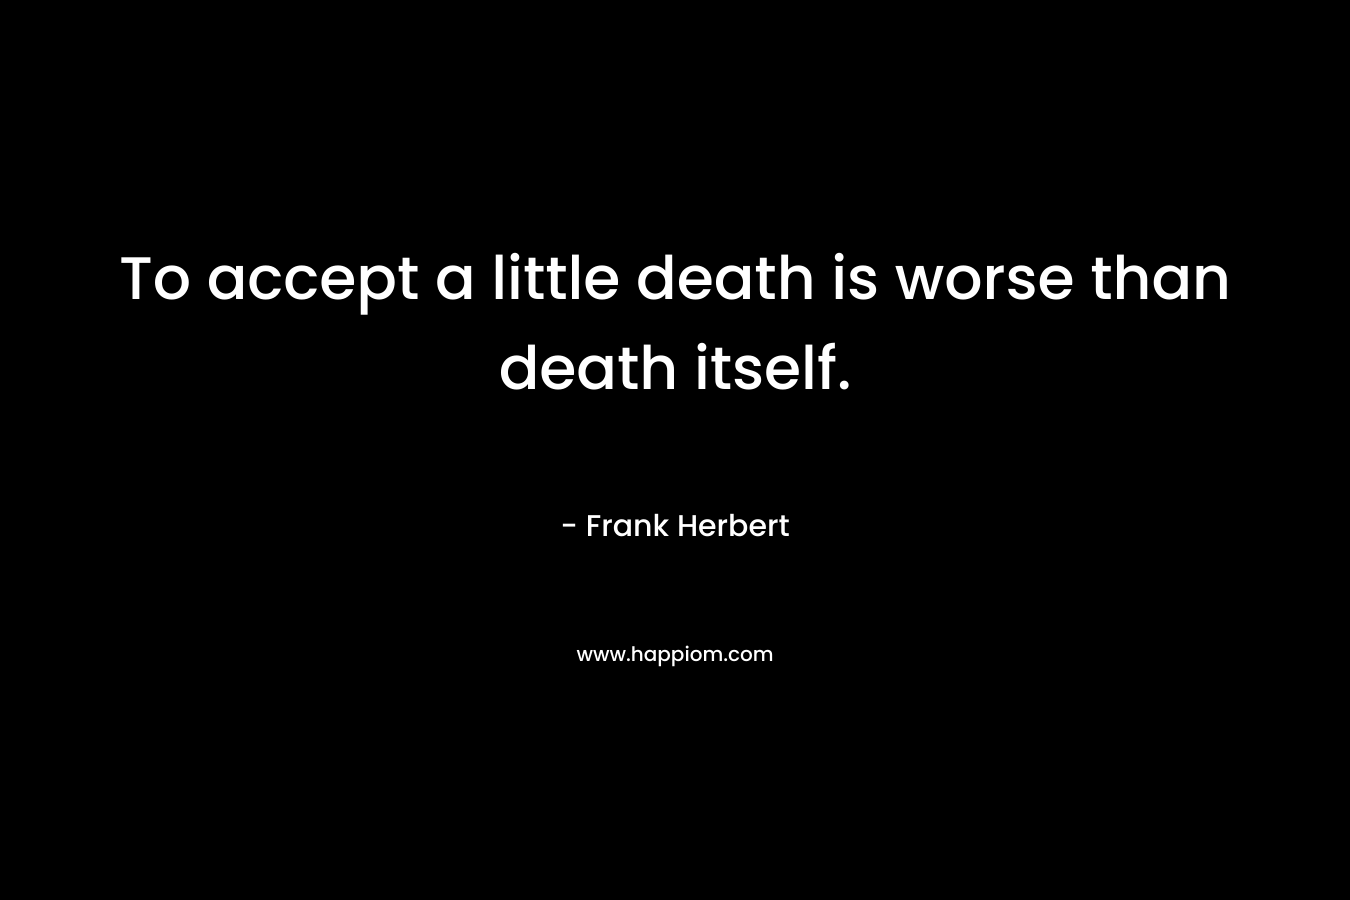 To accept a little death is worse than death itself.